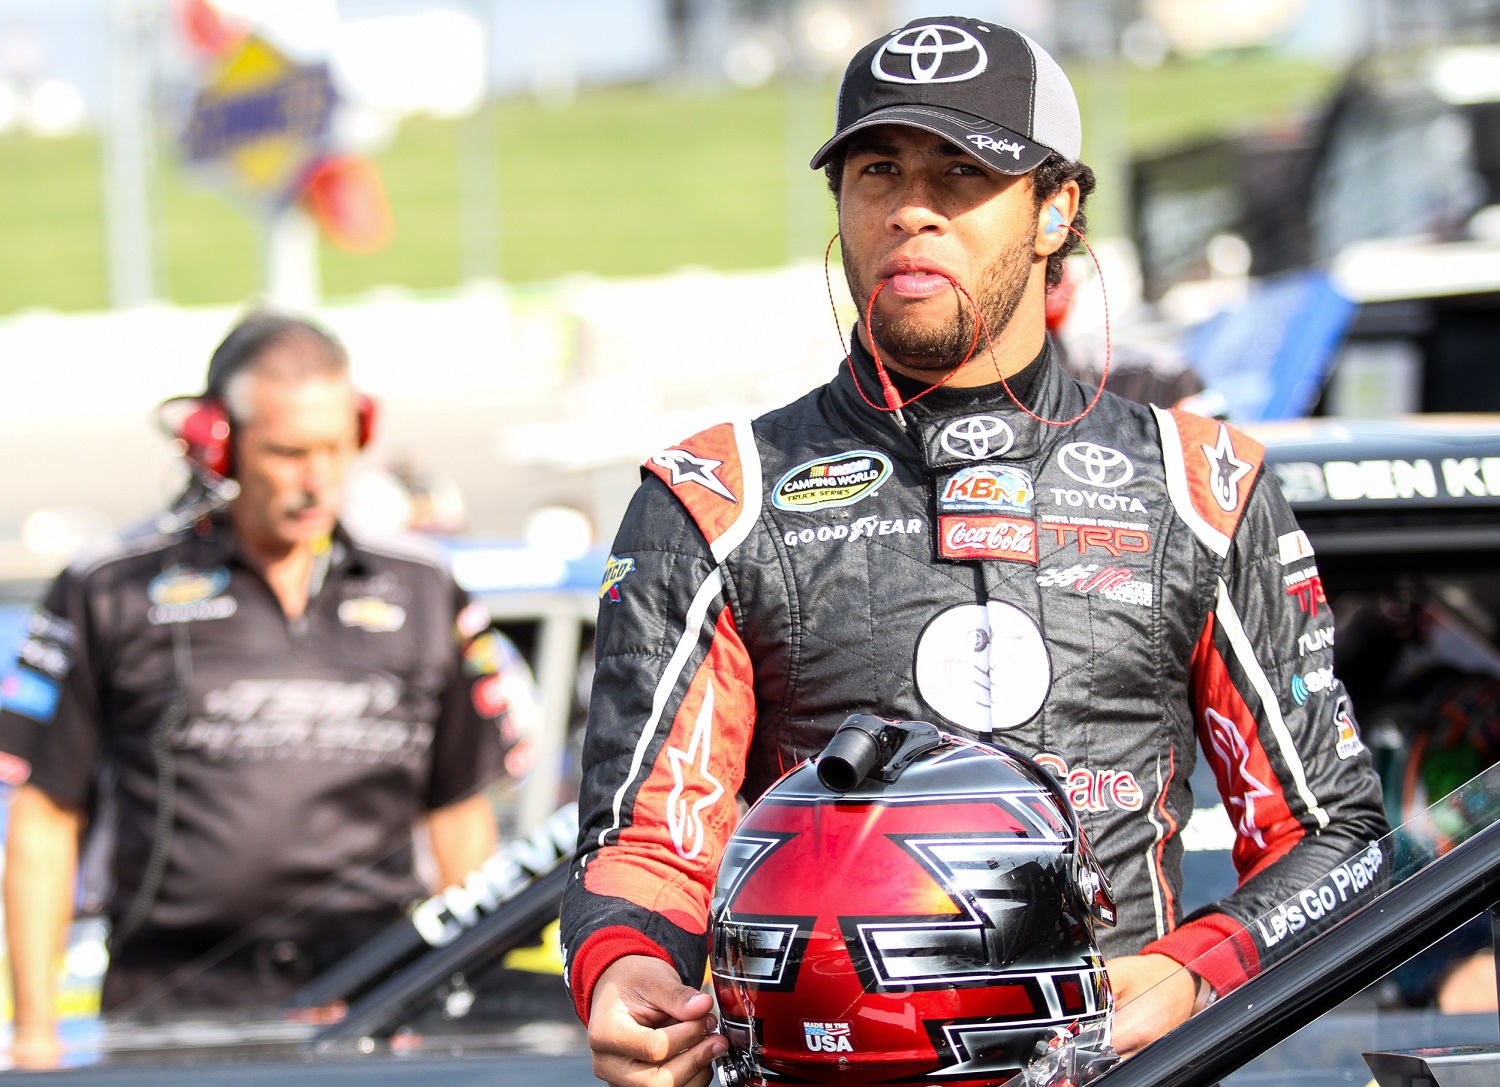 Bubba Wallace at practice for the NASCAR Camping World Truck Series American Ethanol 200 at Iowa Speedway. | Kyle Ocker/ICON SMI/Corbis/Icon Sportswire via Getty Images